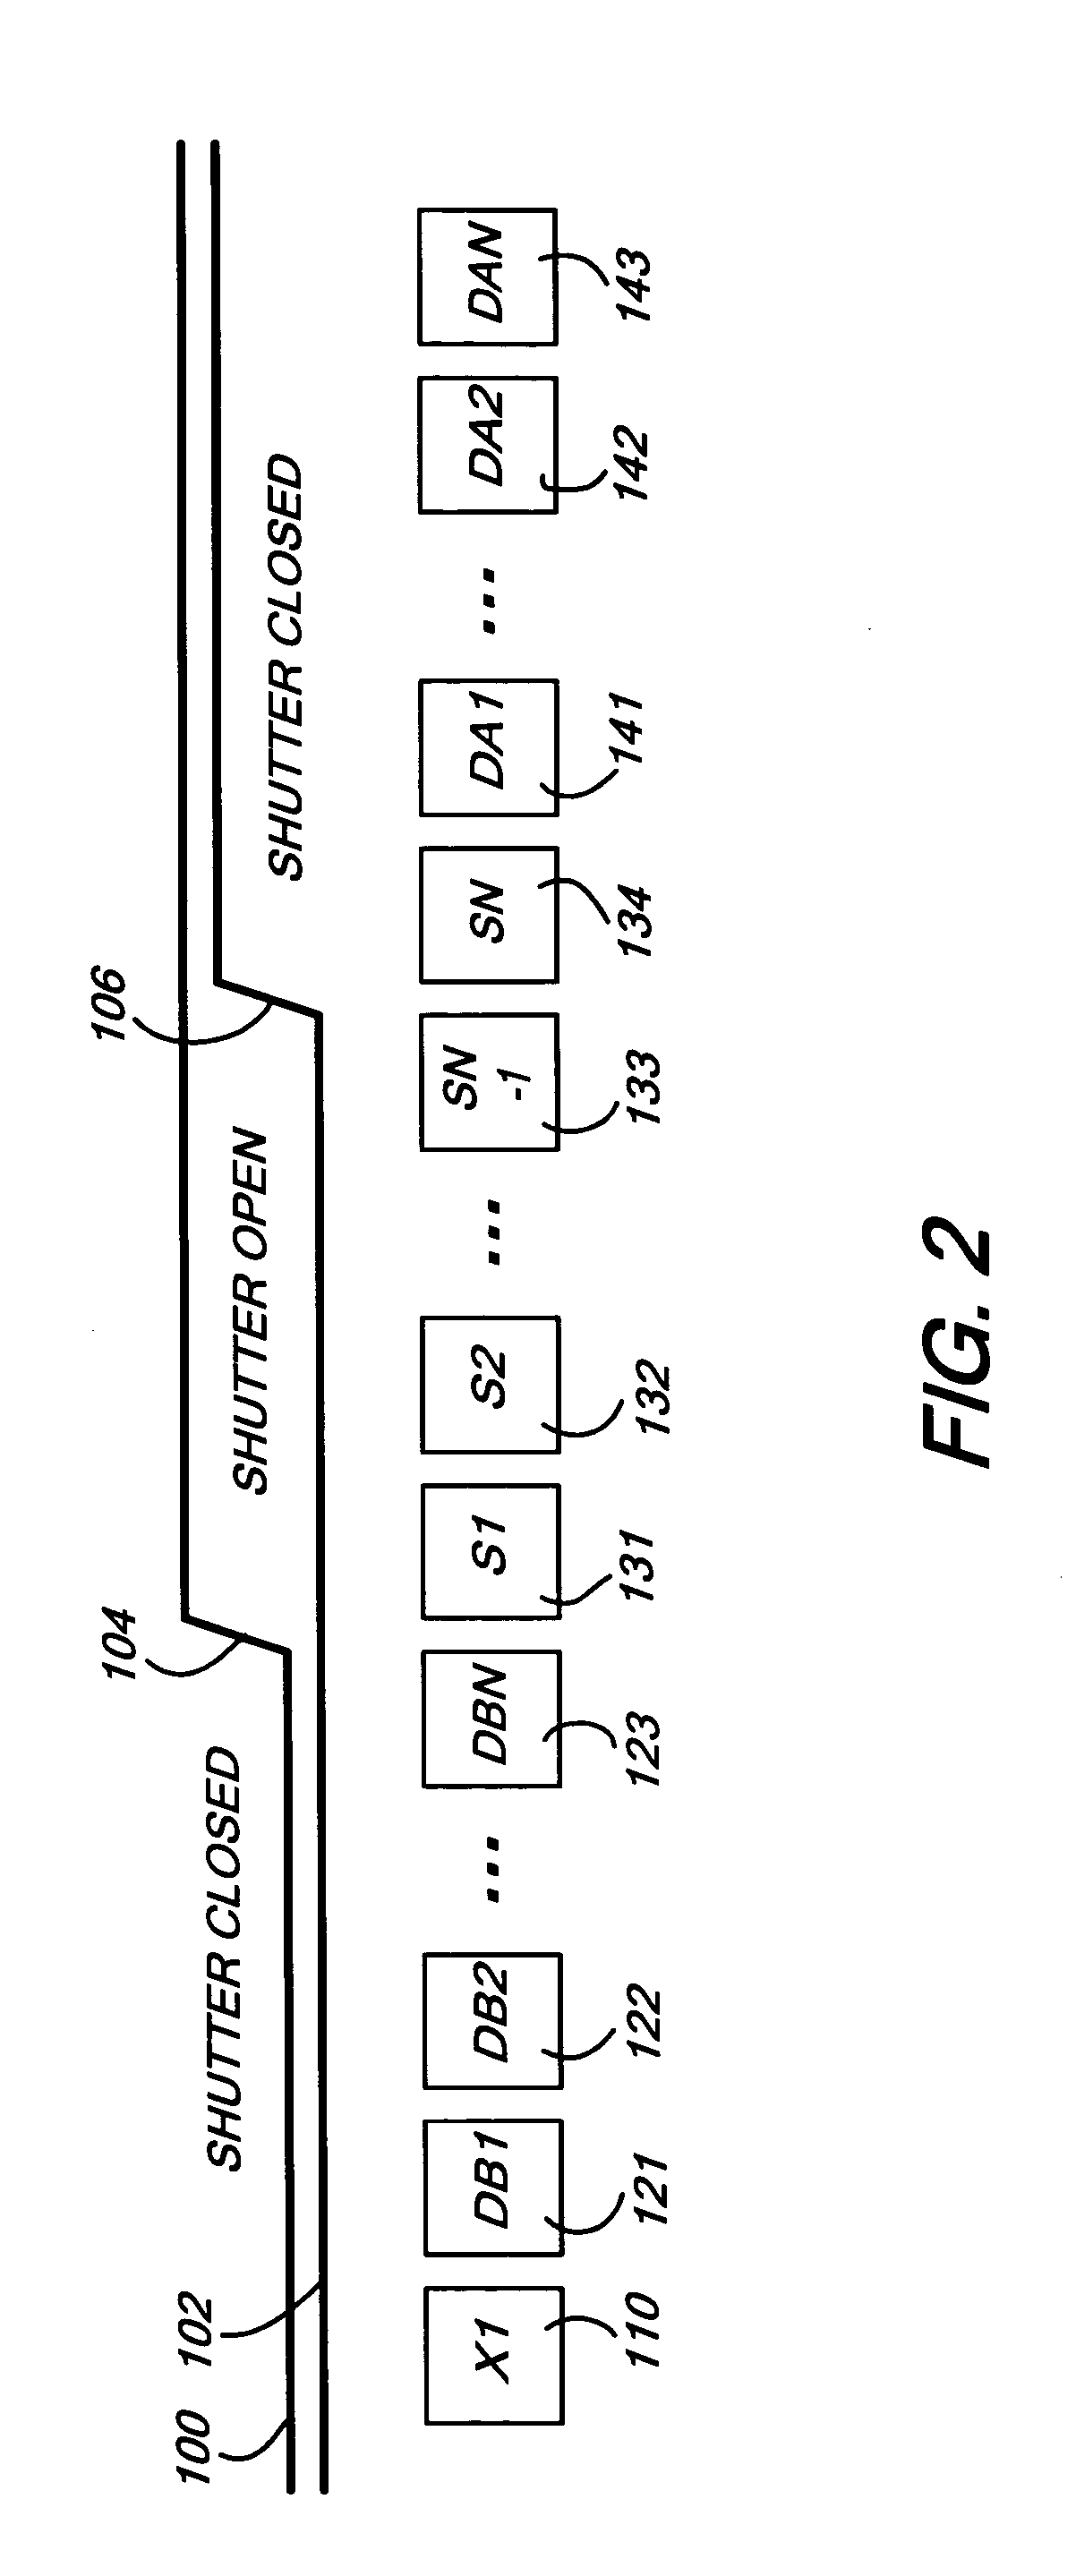 Method and apparatus for capturing high quality long exposure images with a digital camera